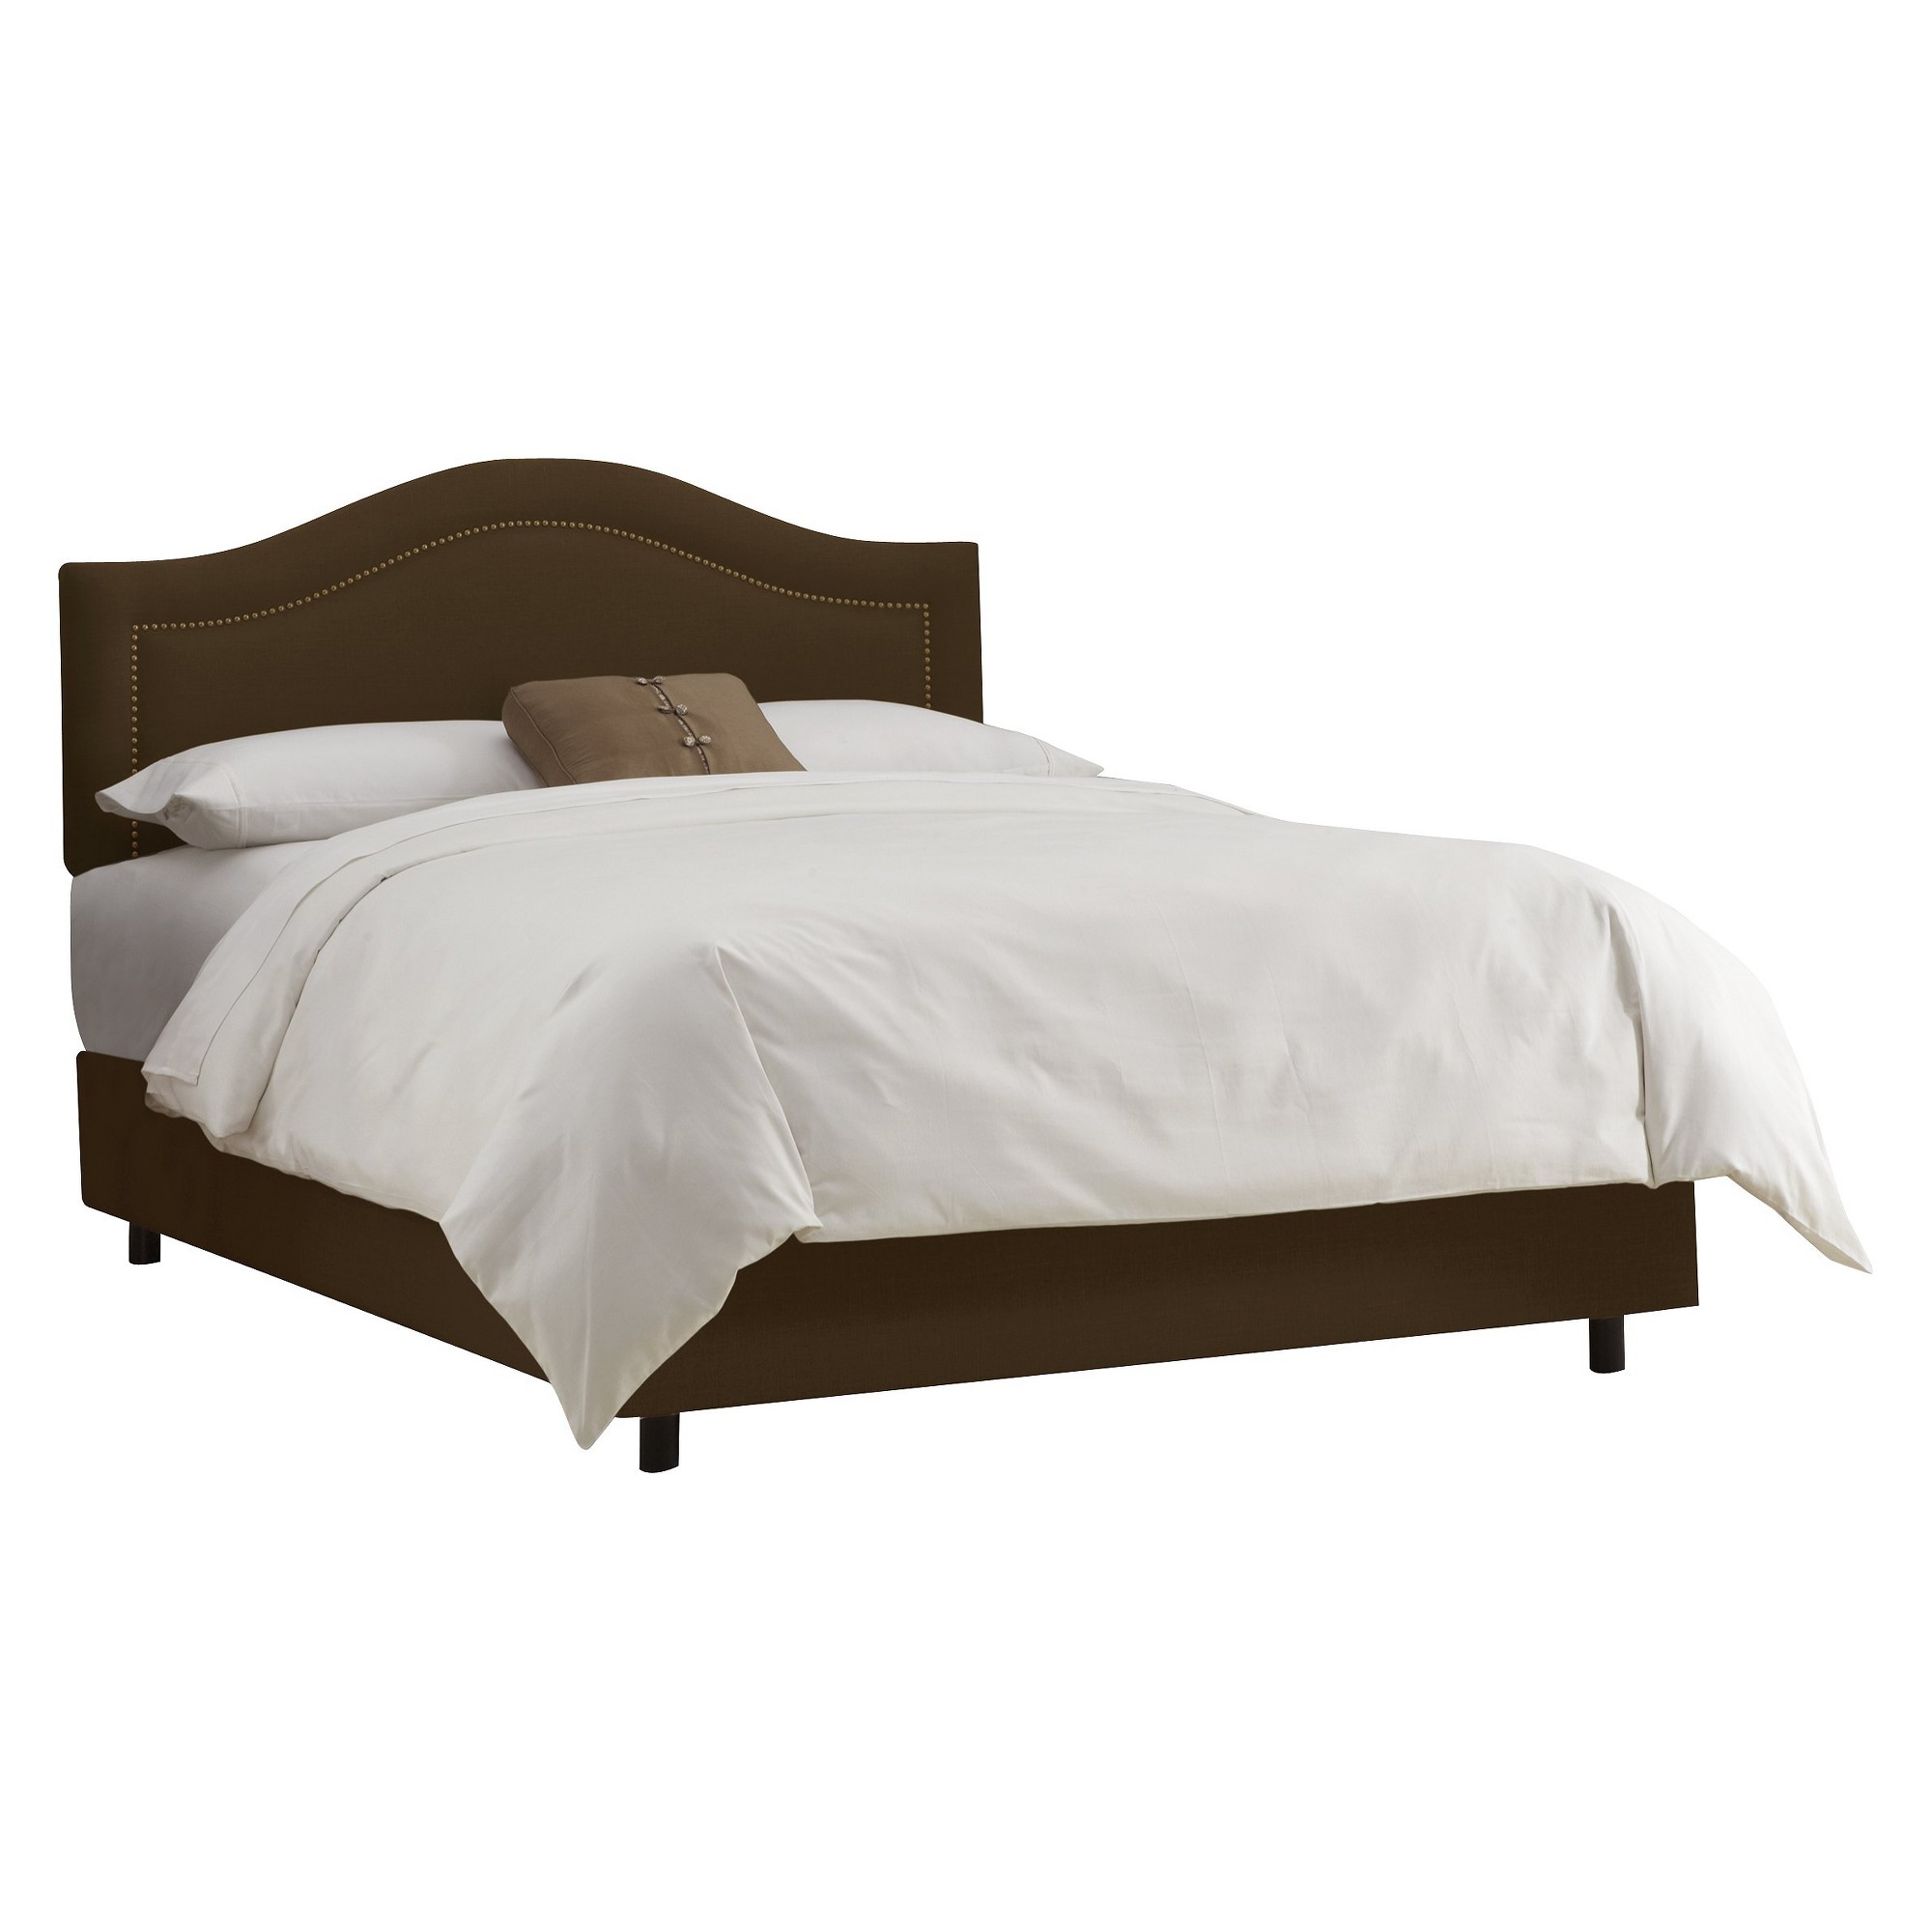 Skyline Furniture Merion Inset Nailbutton Bed - Chocolate (Full) - Skyline Furniture , Brown